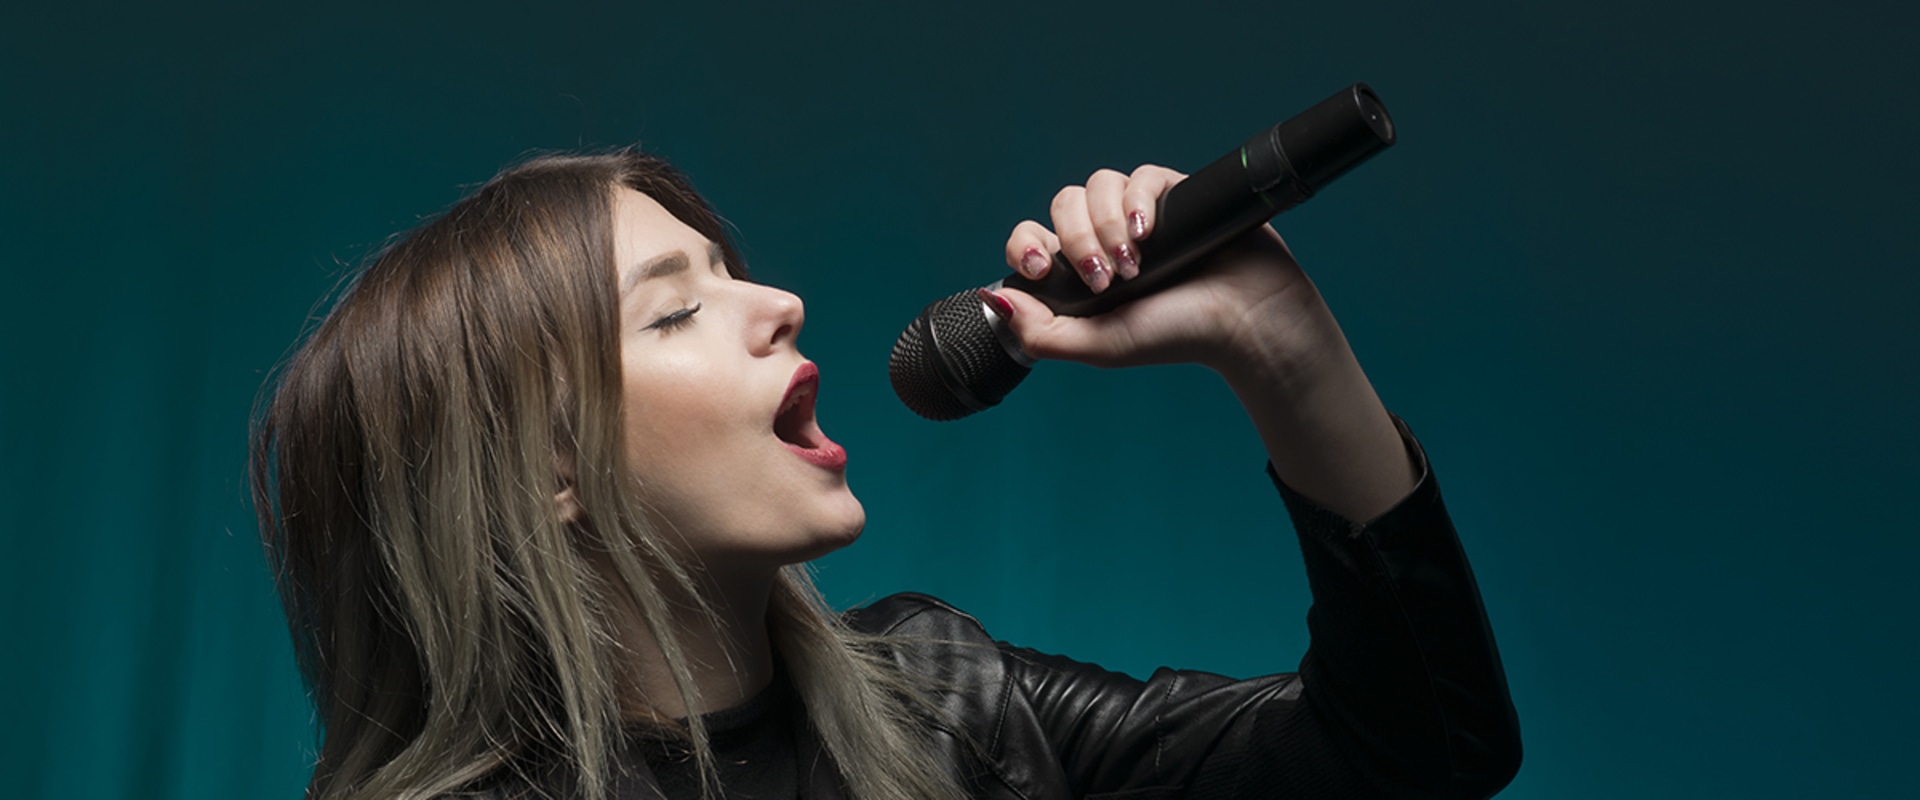 Are vocal lessons worth it?